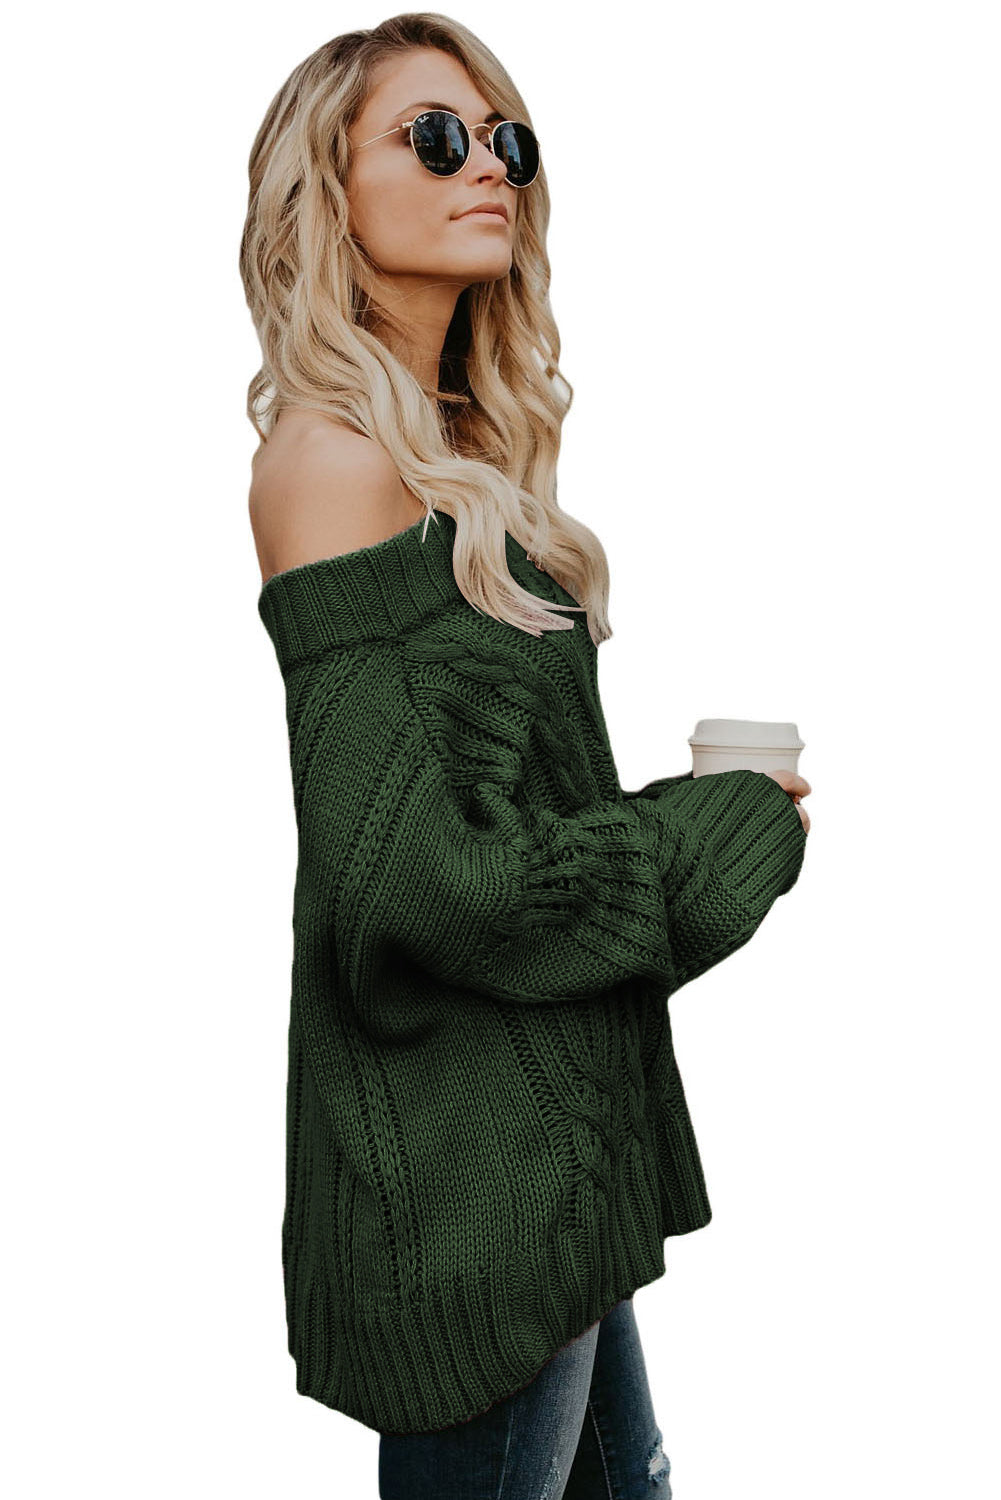 Women Sexy Off Shoulder Loose Pullover Sweater Long Sleeve Knit Top